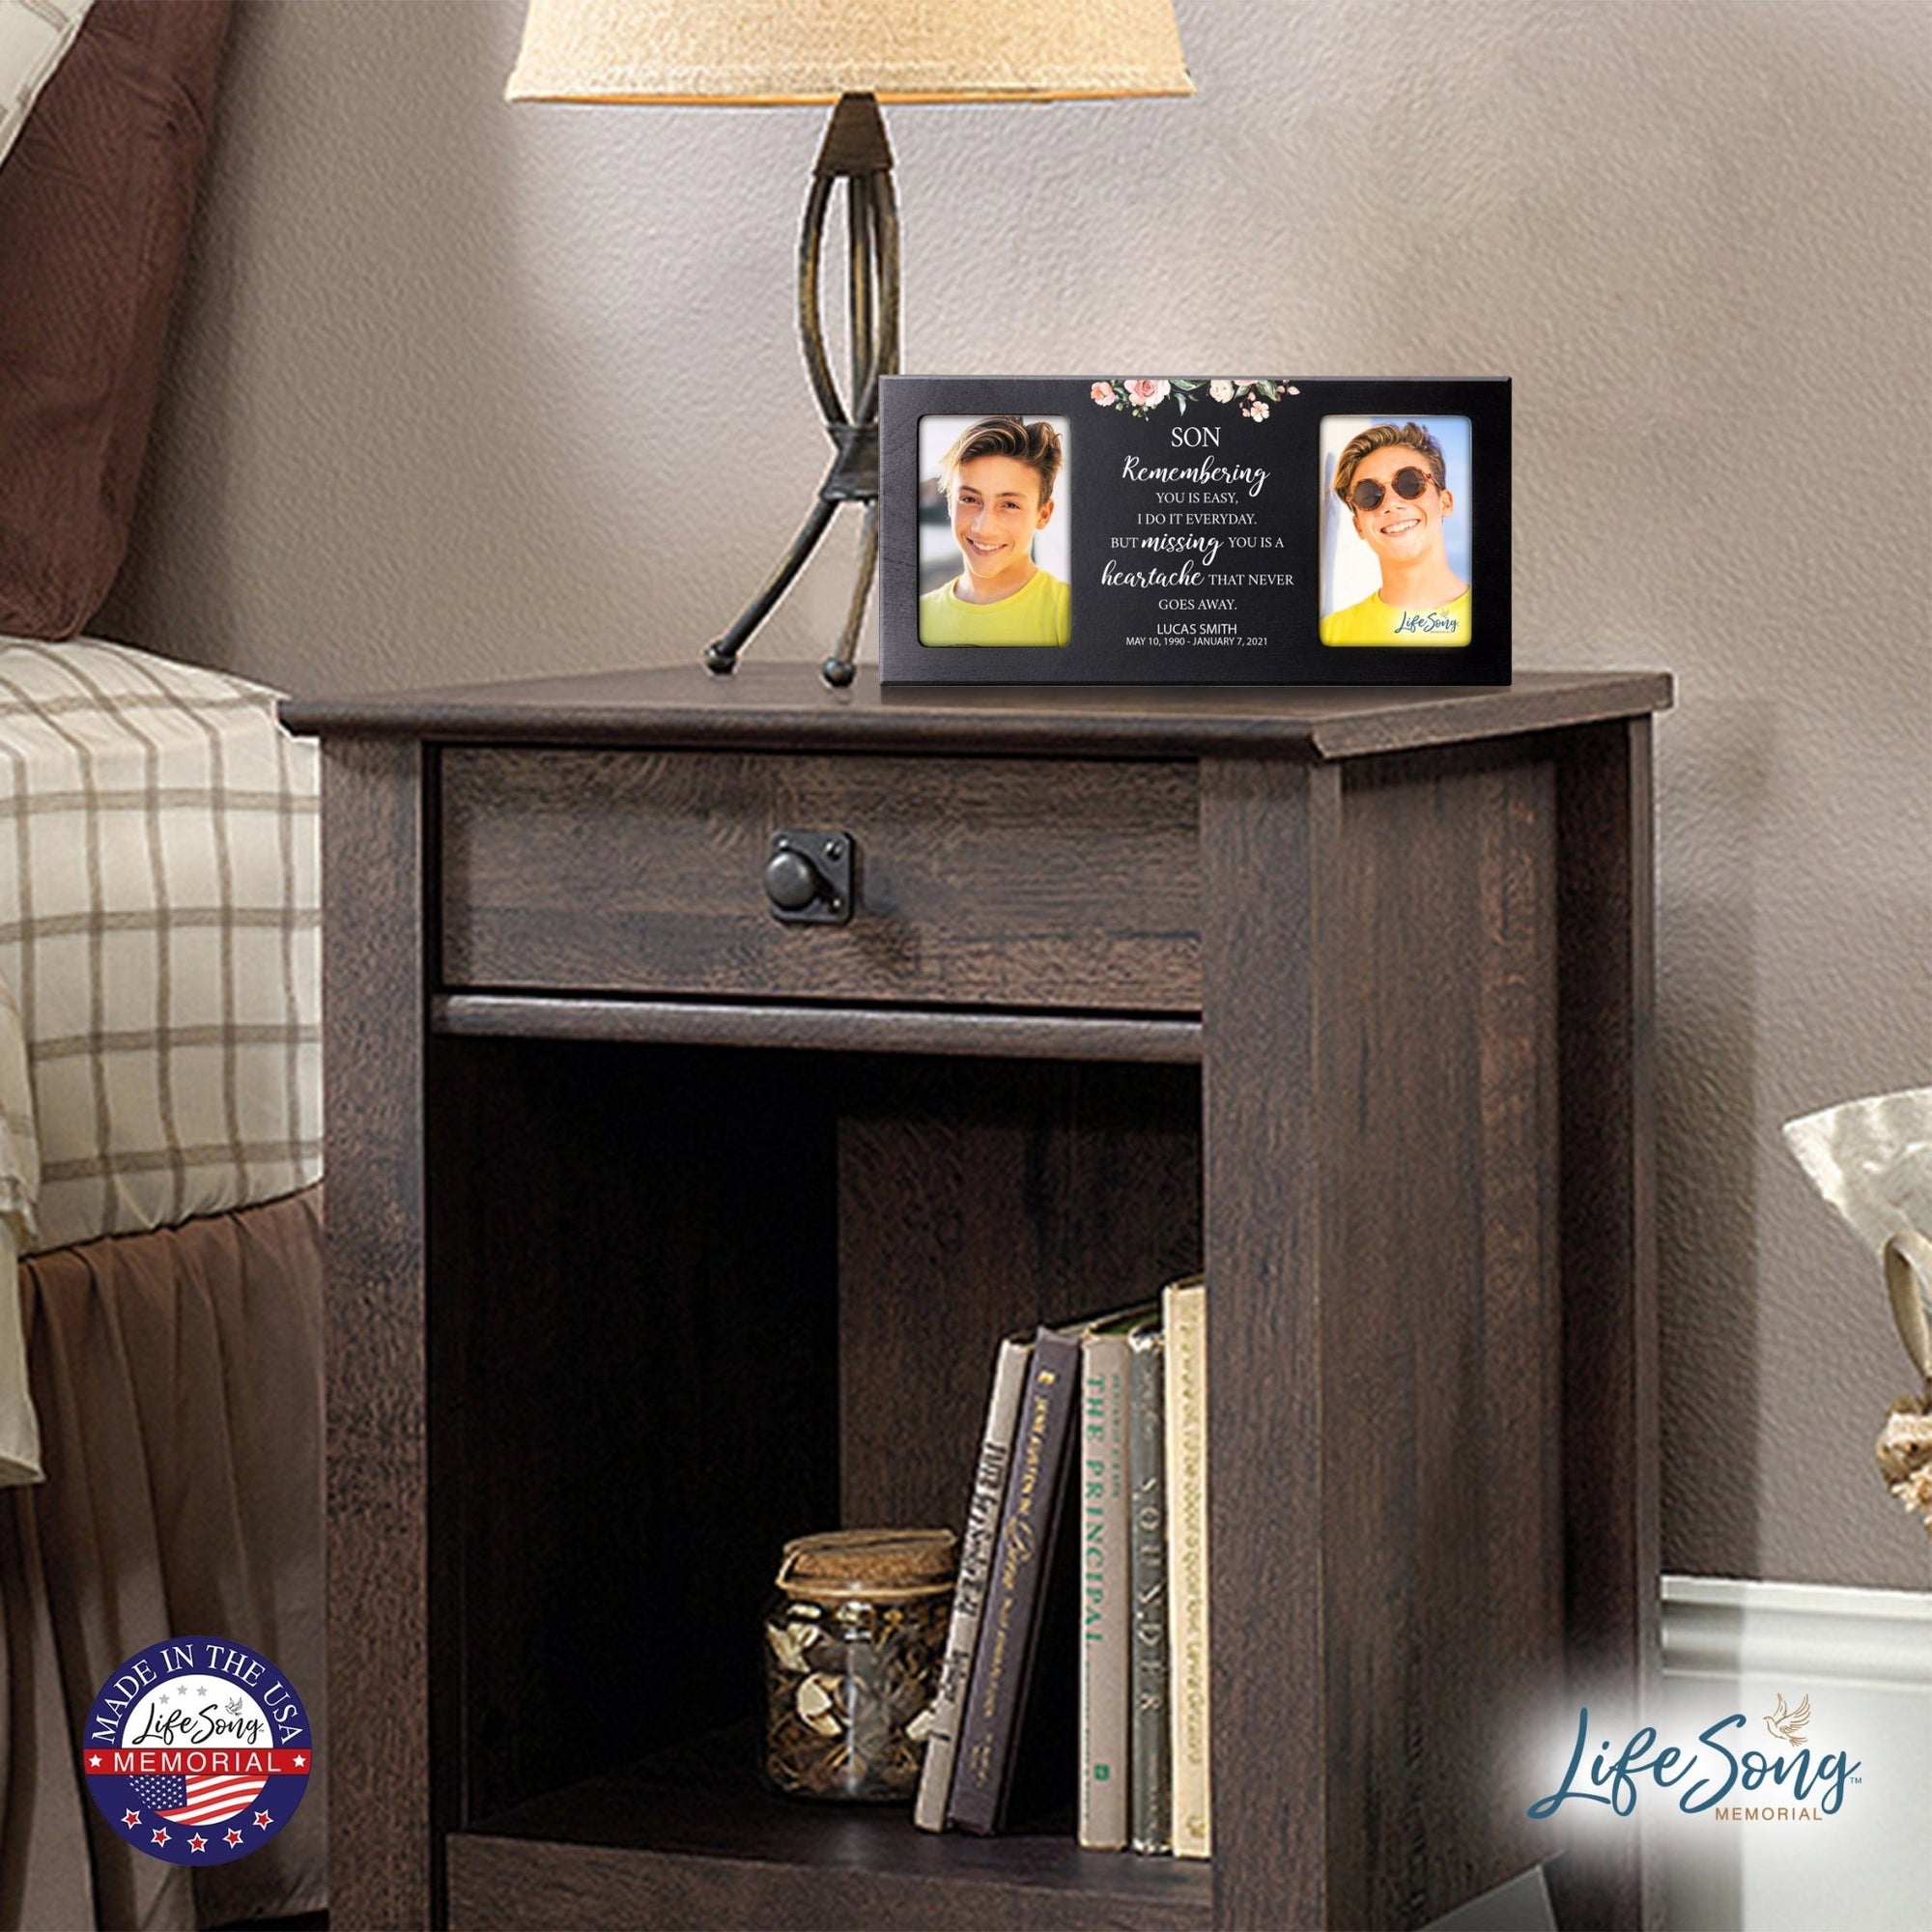 Custom Memorial Picture Frame 16x8in Holds Two 4x6in Photos - Son, Remembering You Is Easy - LifeSong Milestones